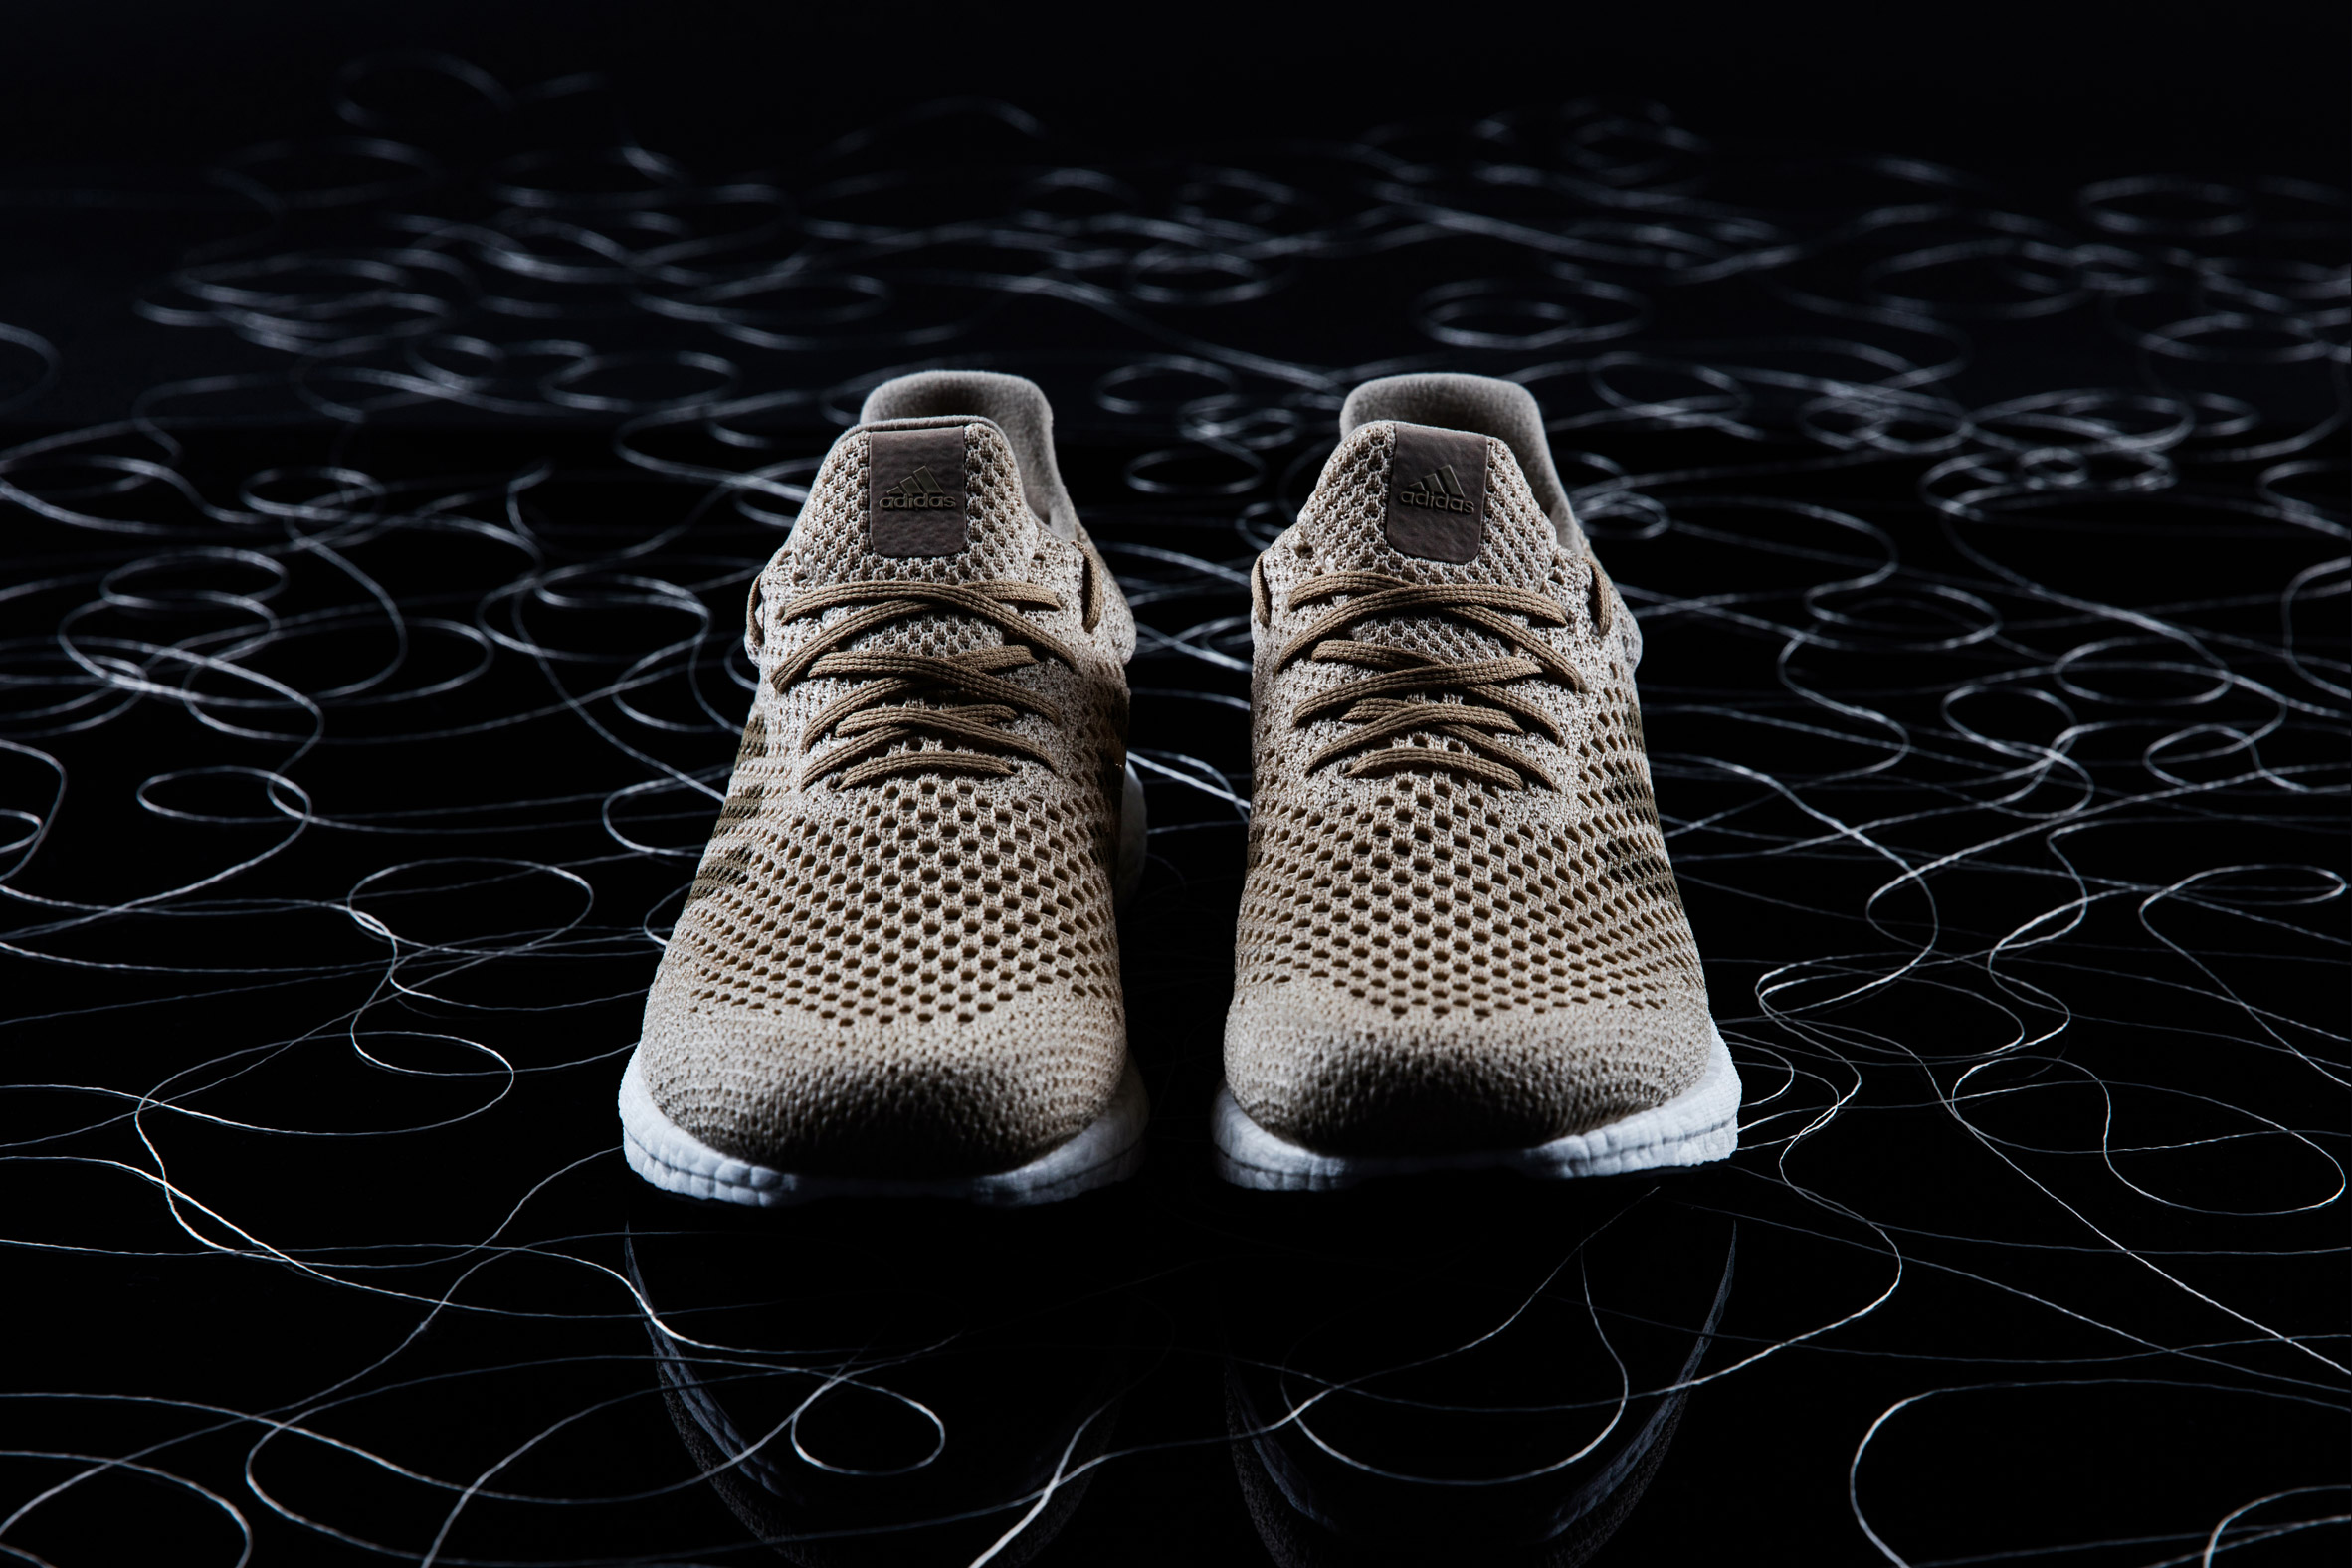 Adidas's trainers "achieve an unrivalled level of sustainability"